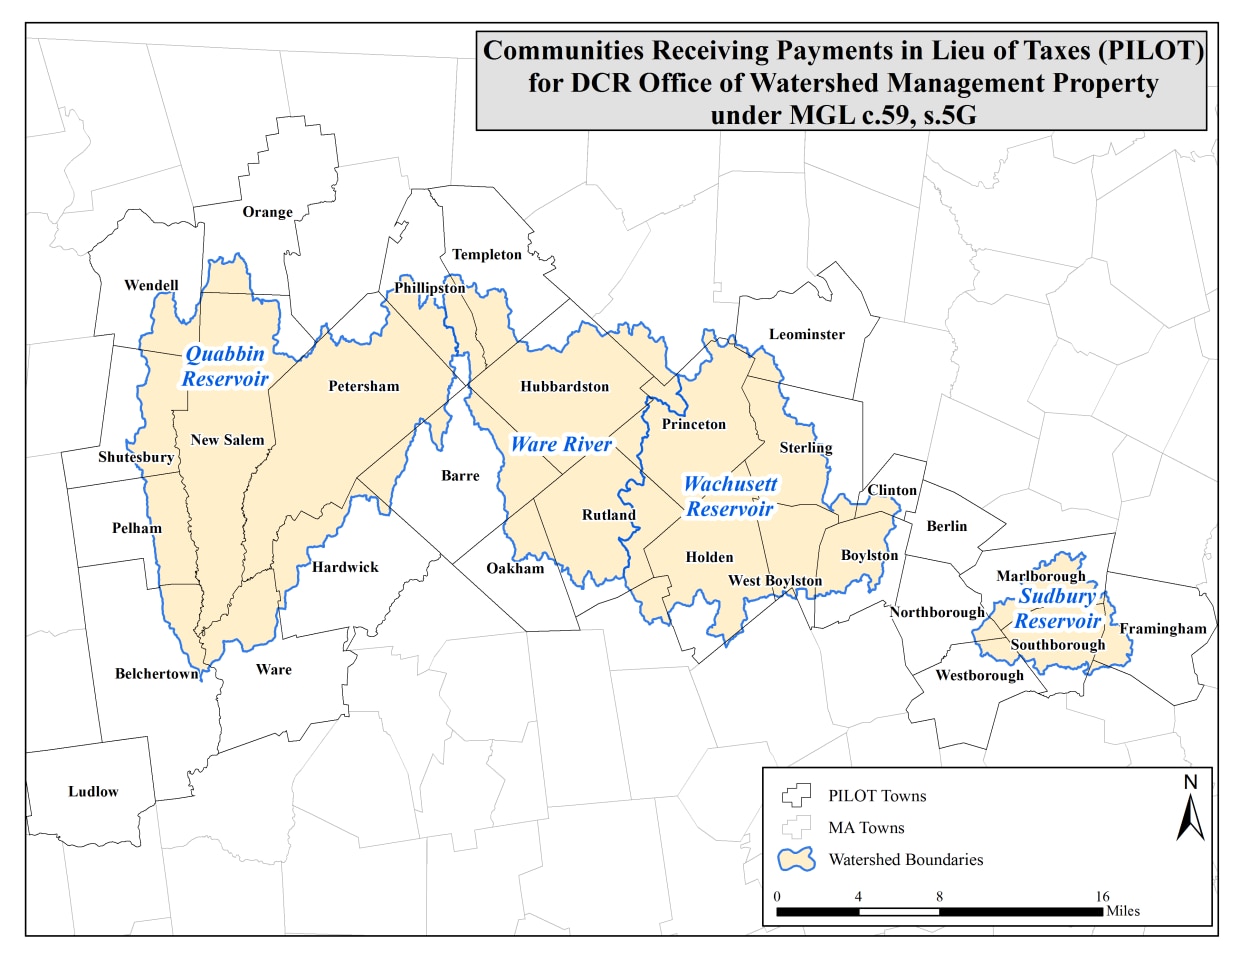 Communities that receive Payments in Lieu of Taxes from DCR Watershed Management